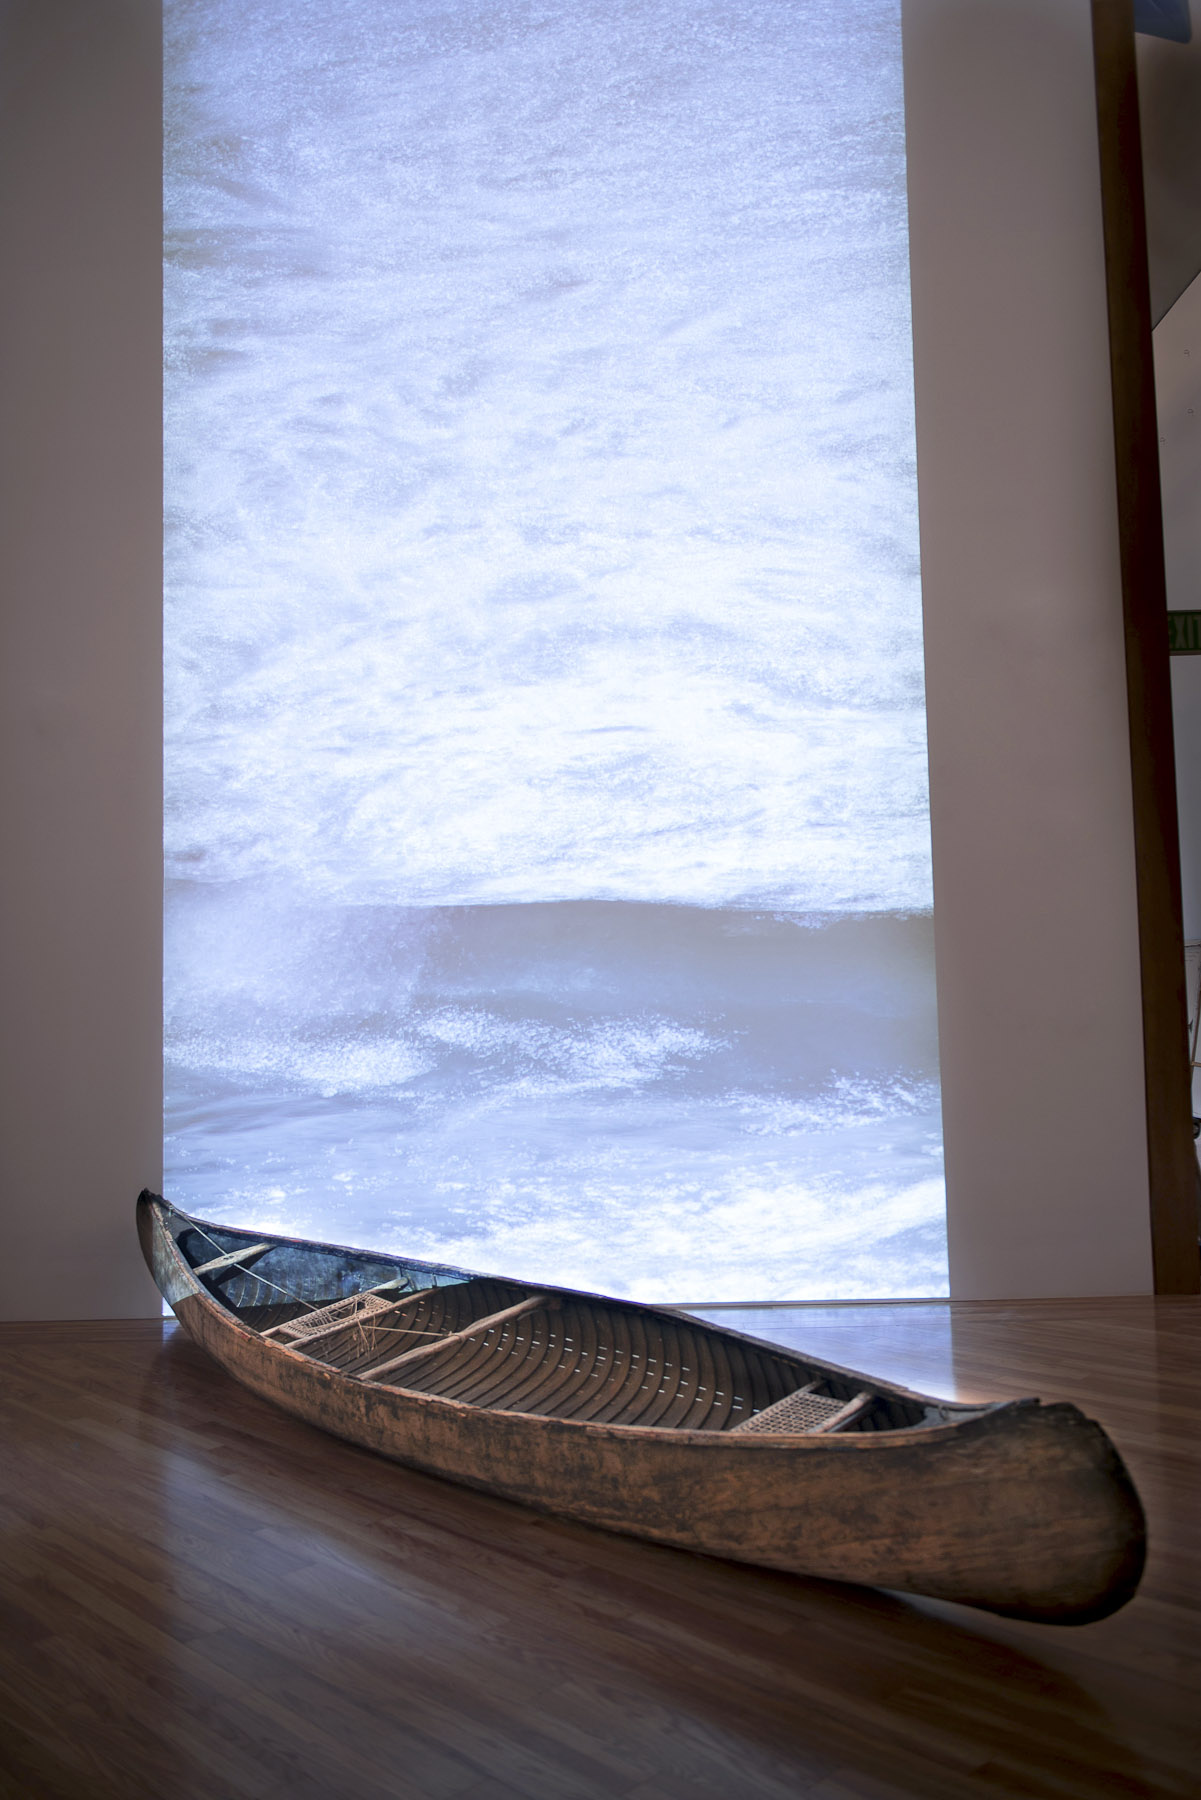 Tracind Antilles, 2013, Installation, Wooden Canoe, and video projection. Dimentions: variable. The Patricia and Phillips Frost Museum, Miami, FL.